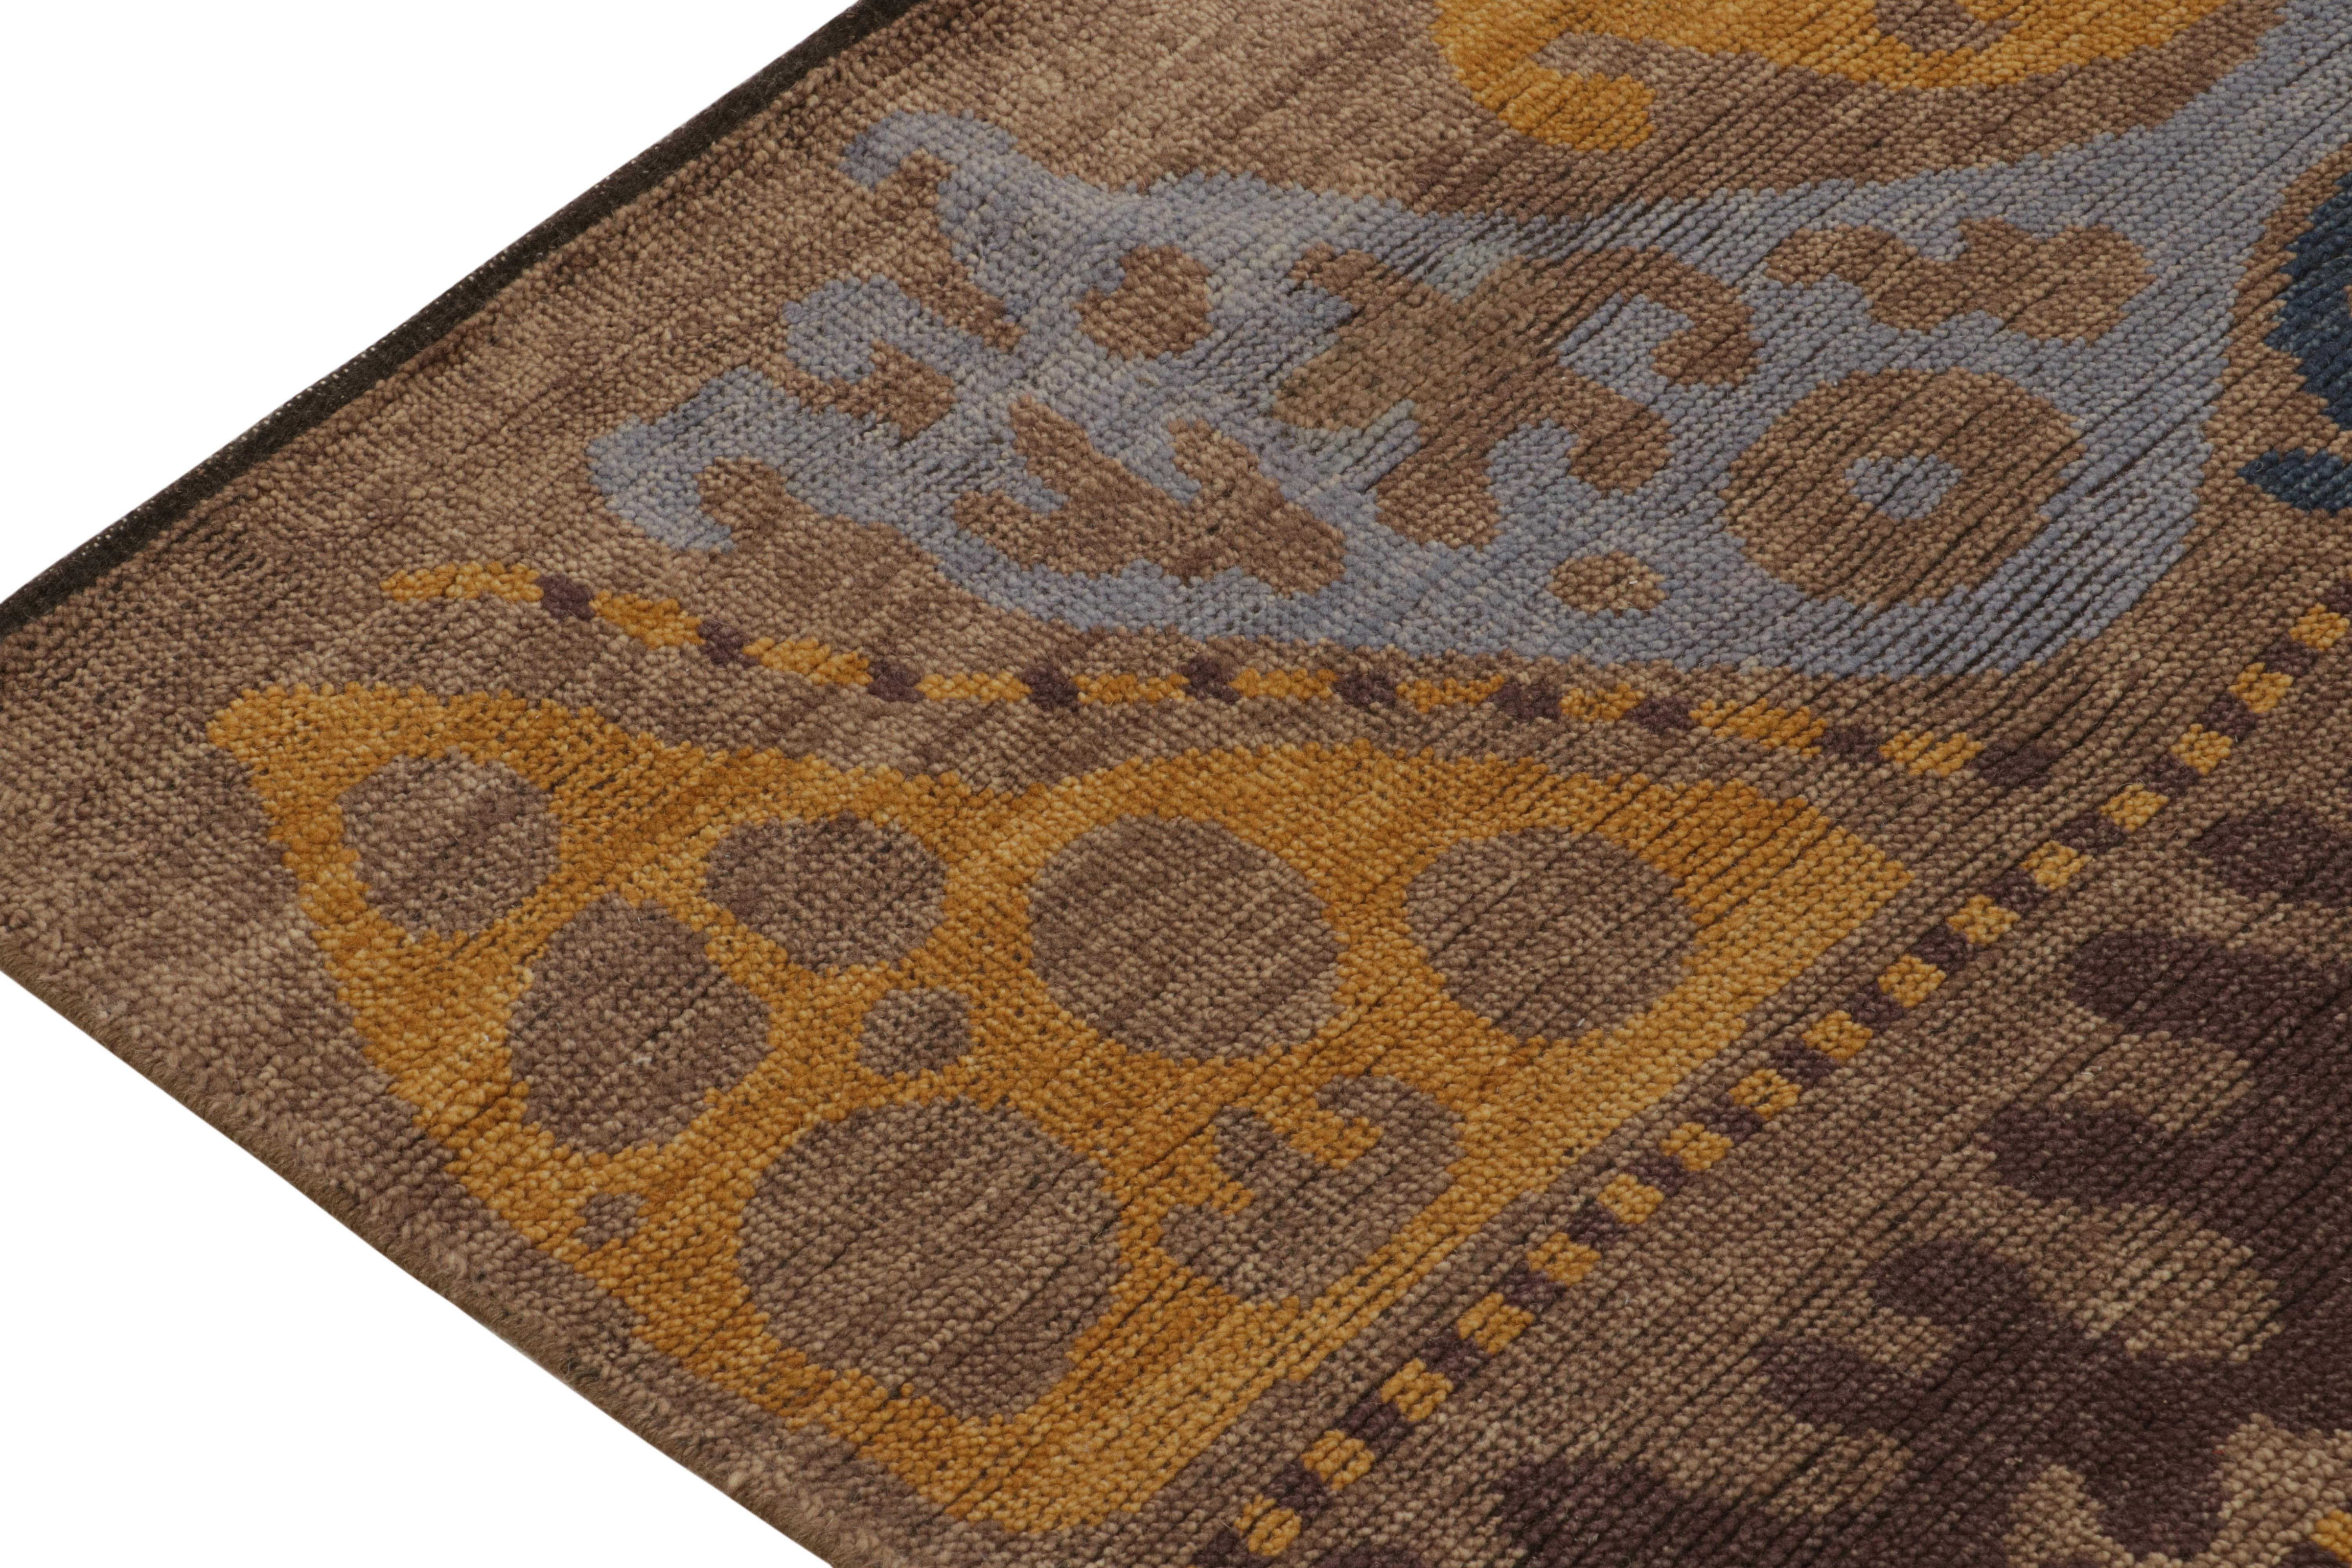 Rug & Kilim’s Tribal style rug in Beige-Brown, Gold and Blue Patterns In New Condition For Sale In Long Island City, NY